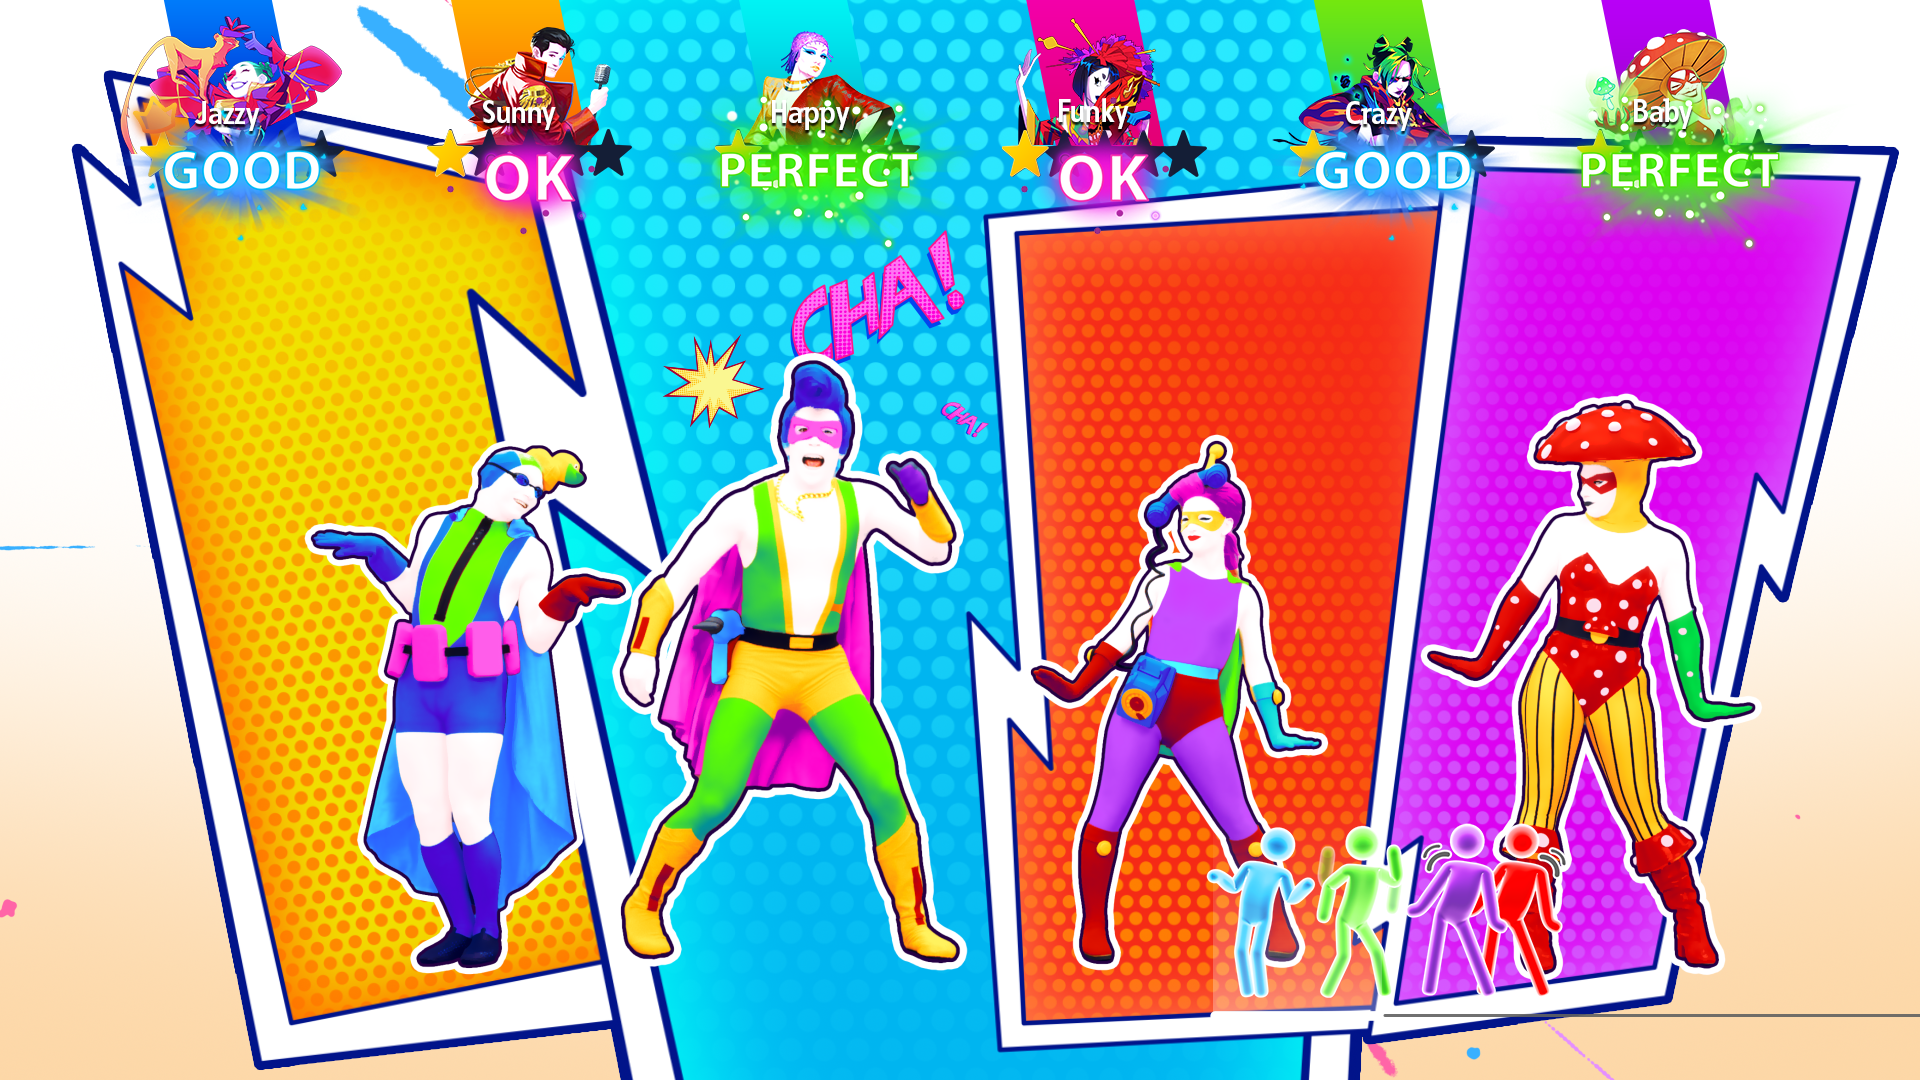 In the Summertime, Just Dance Wiki